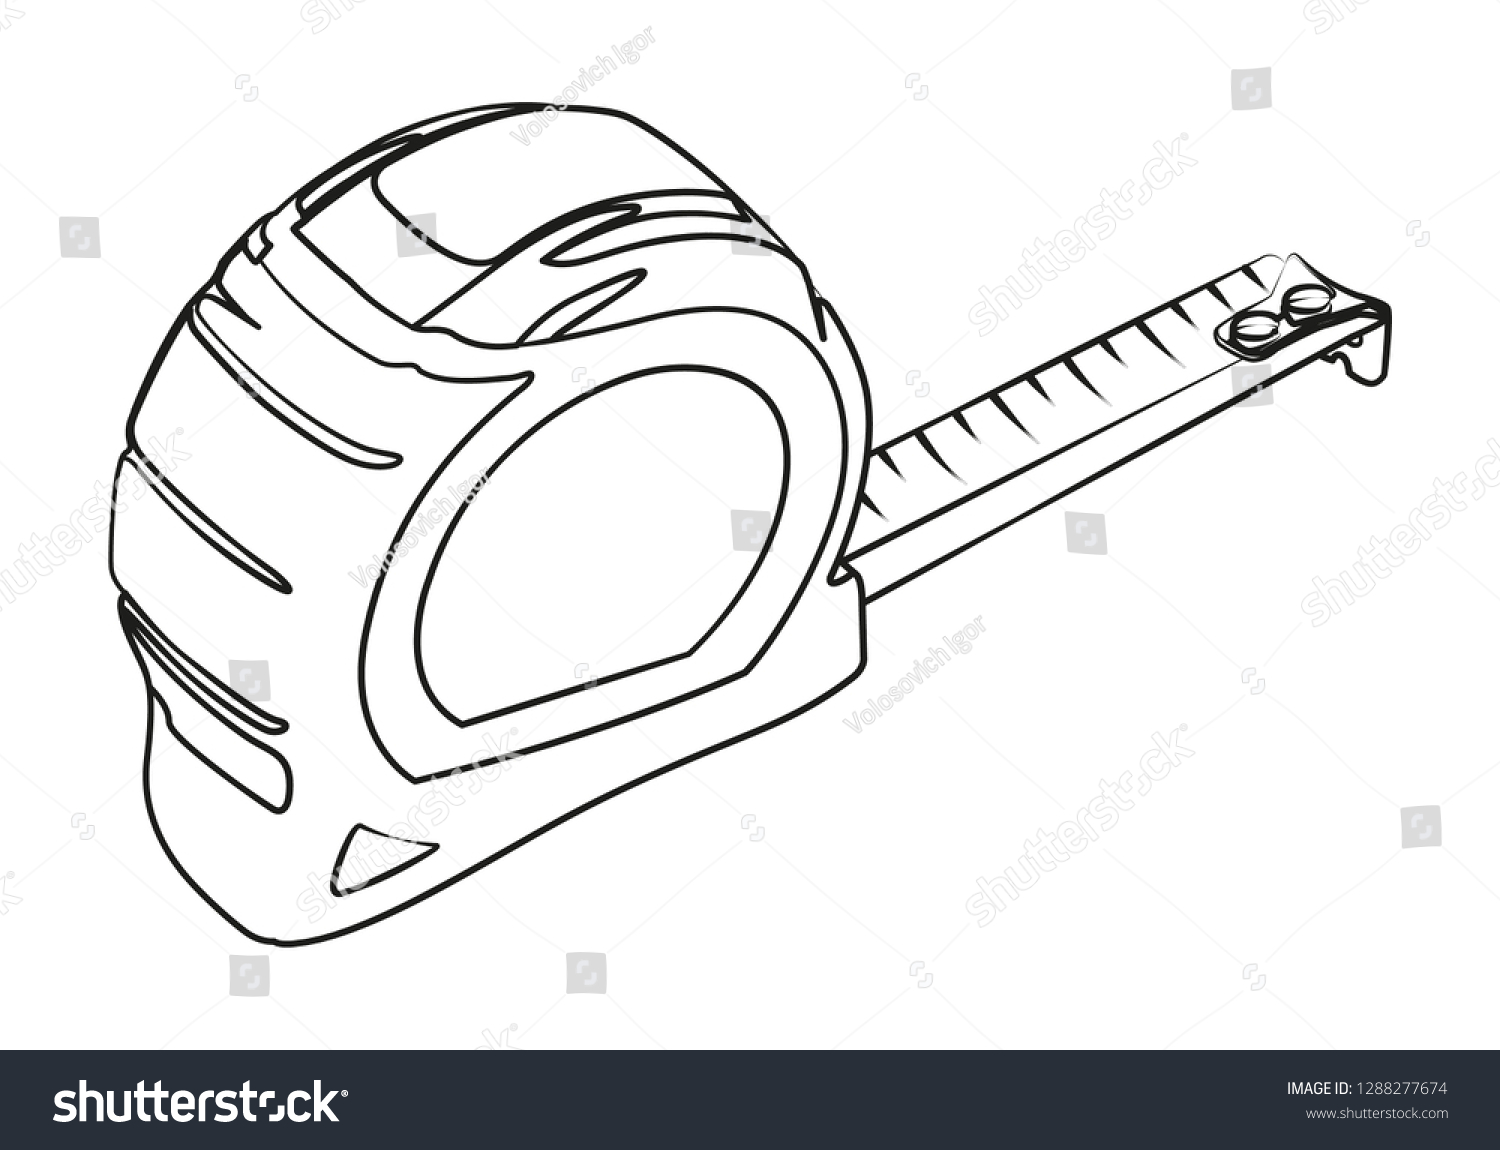 Tape Measure Contour Vector Illustration Stock Vector (Royalty Free ...